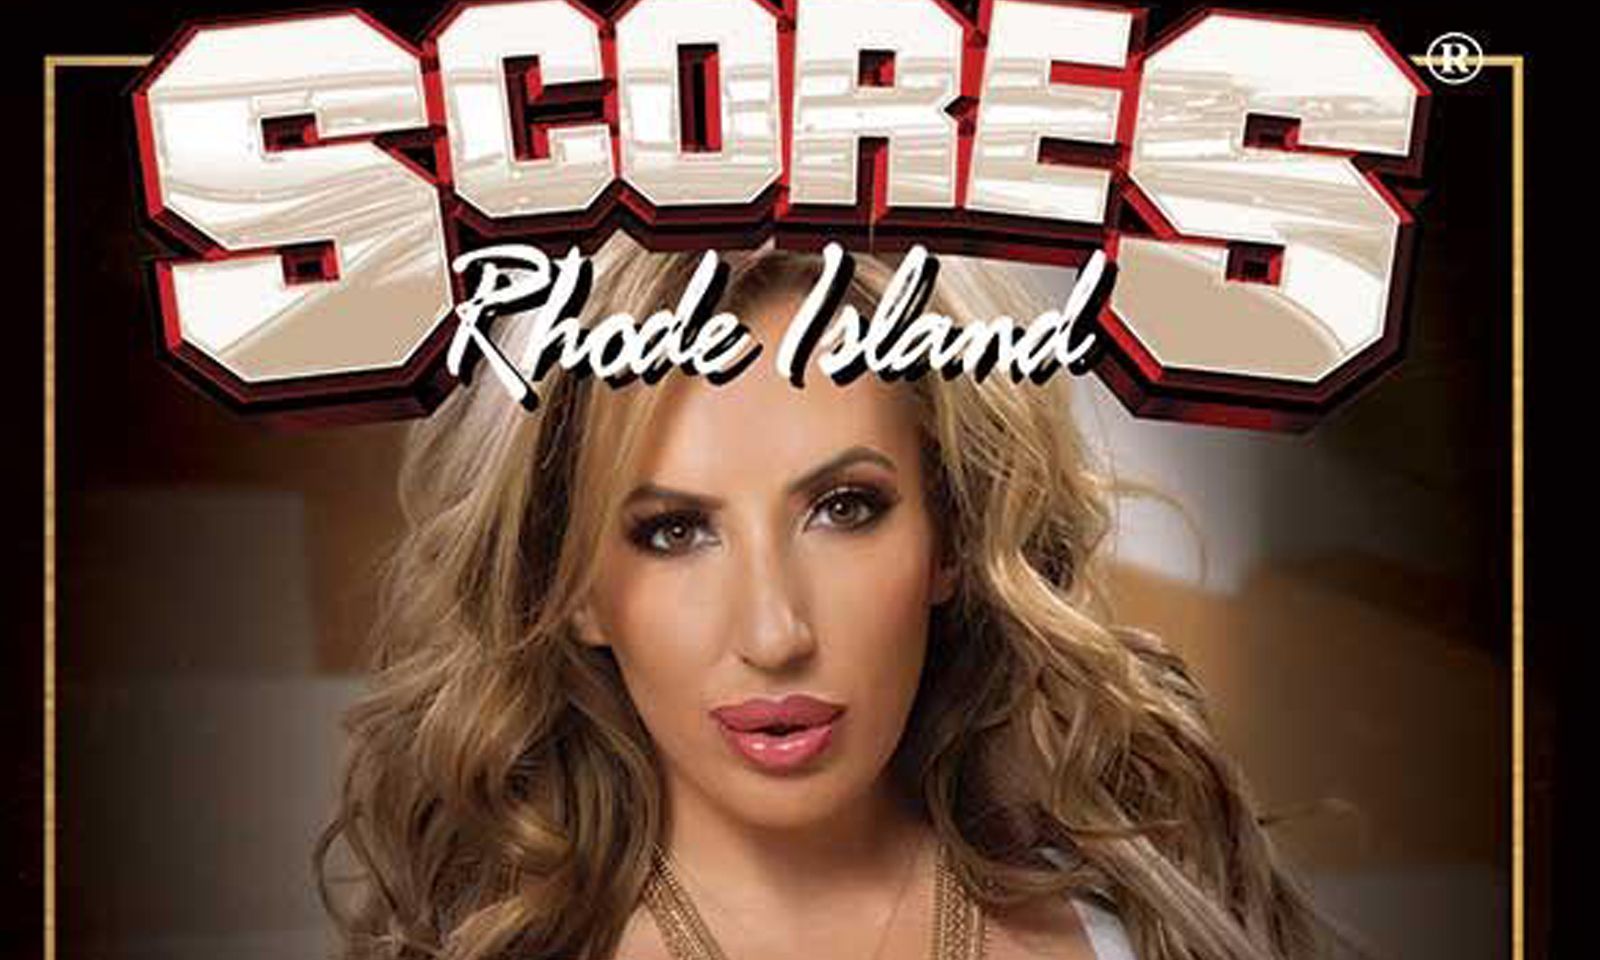 Richelle Ryan to Celebrate St. Paddy's Day at Scores Rhode Island